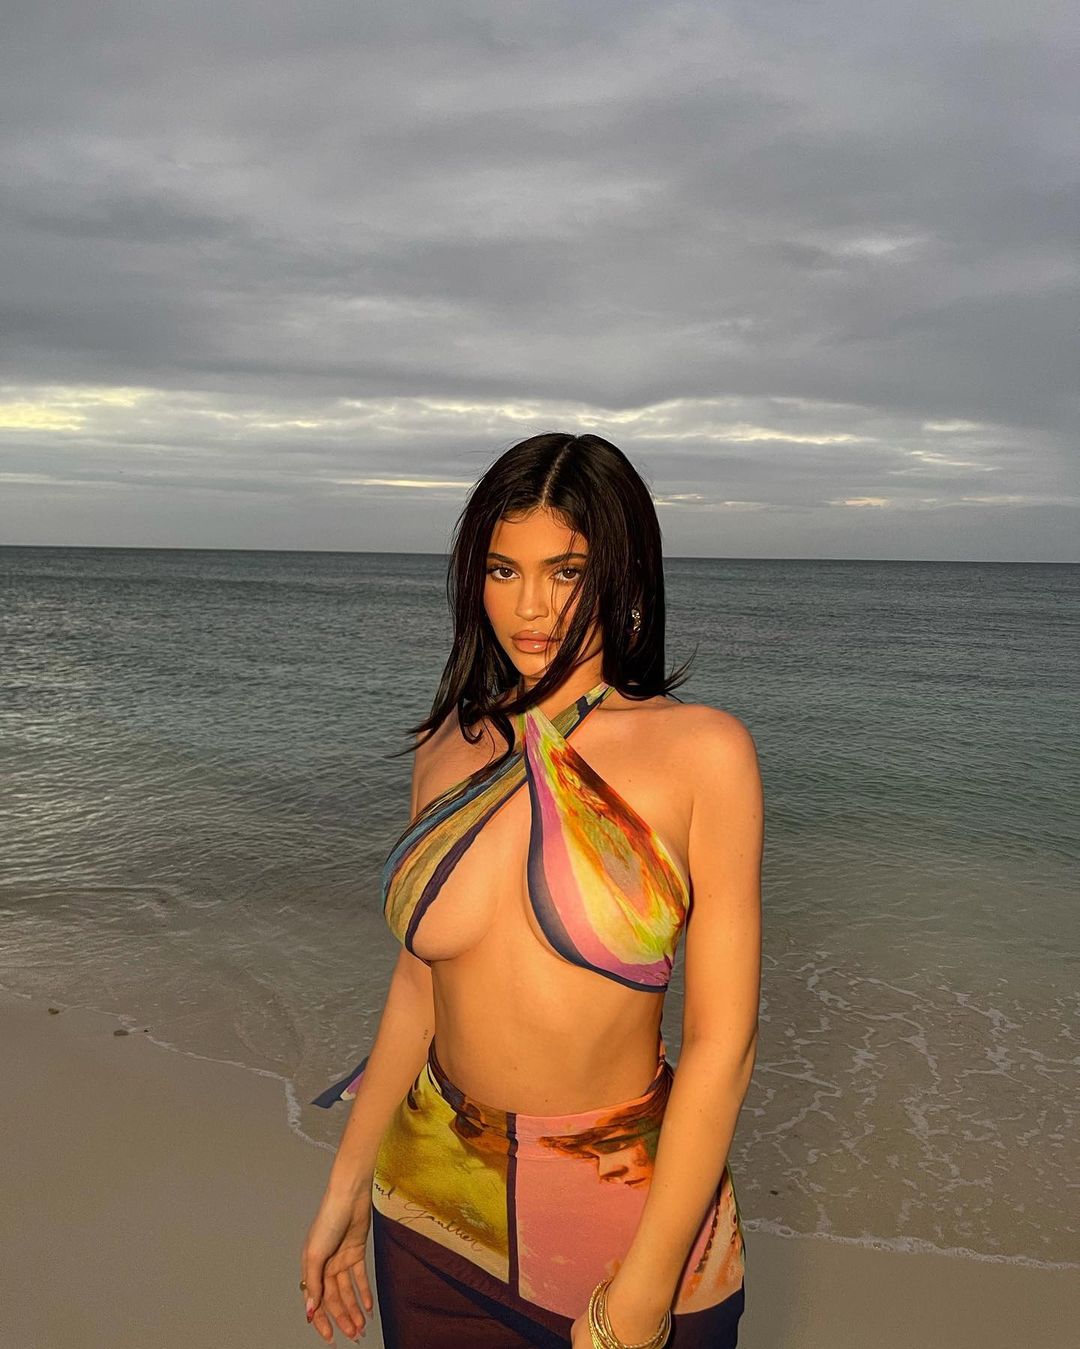 kylie jenner, Keeping Up with the Kardashians, KUWTK, Kylie Jenner instagram, kylie jenner figure